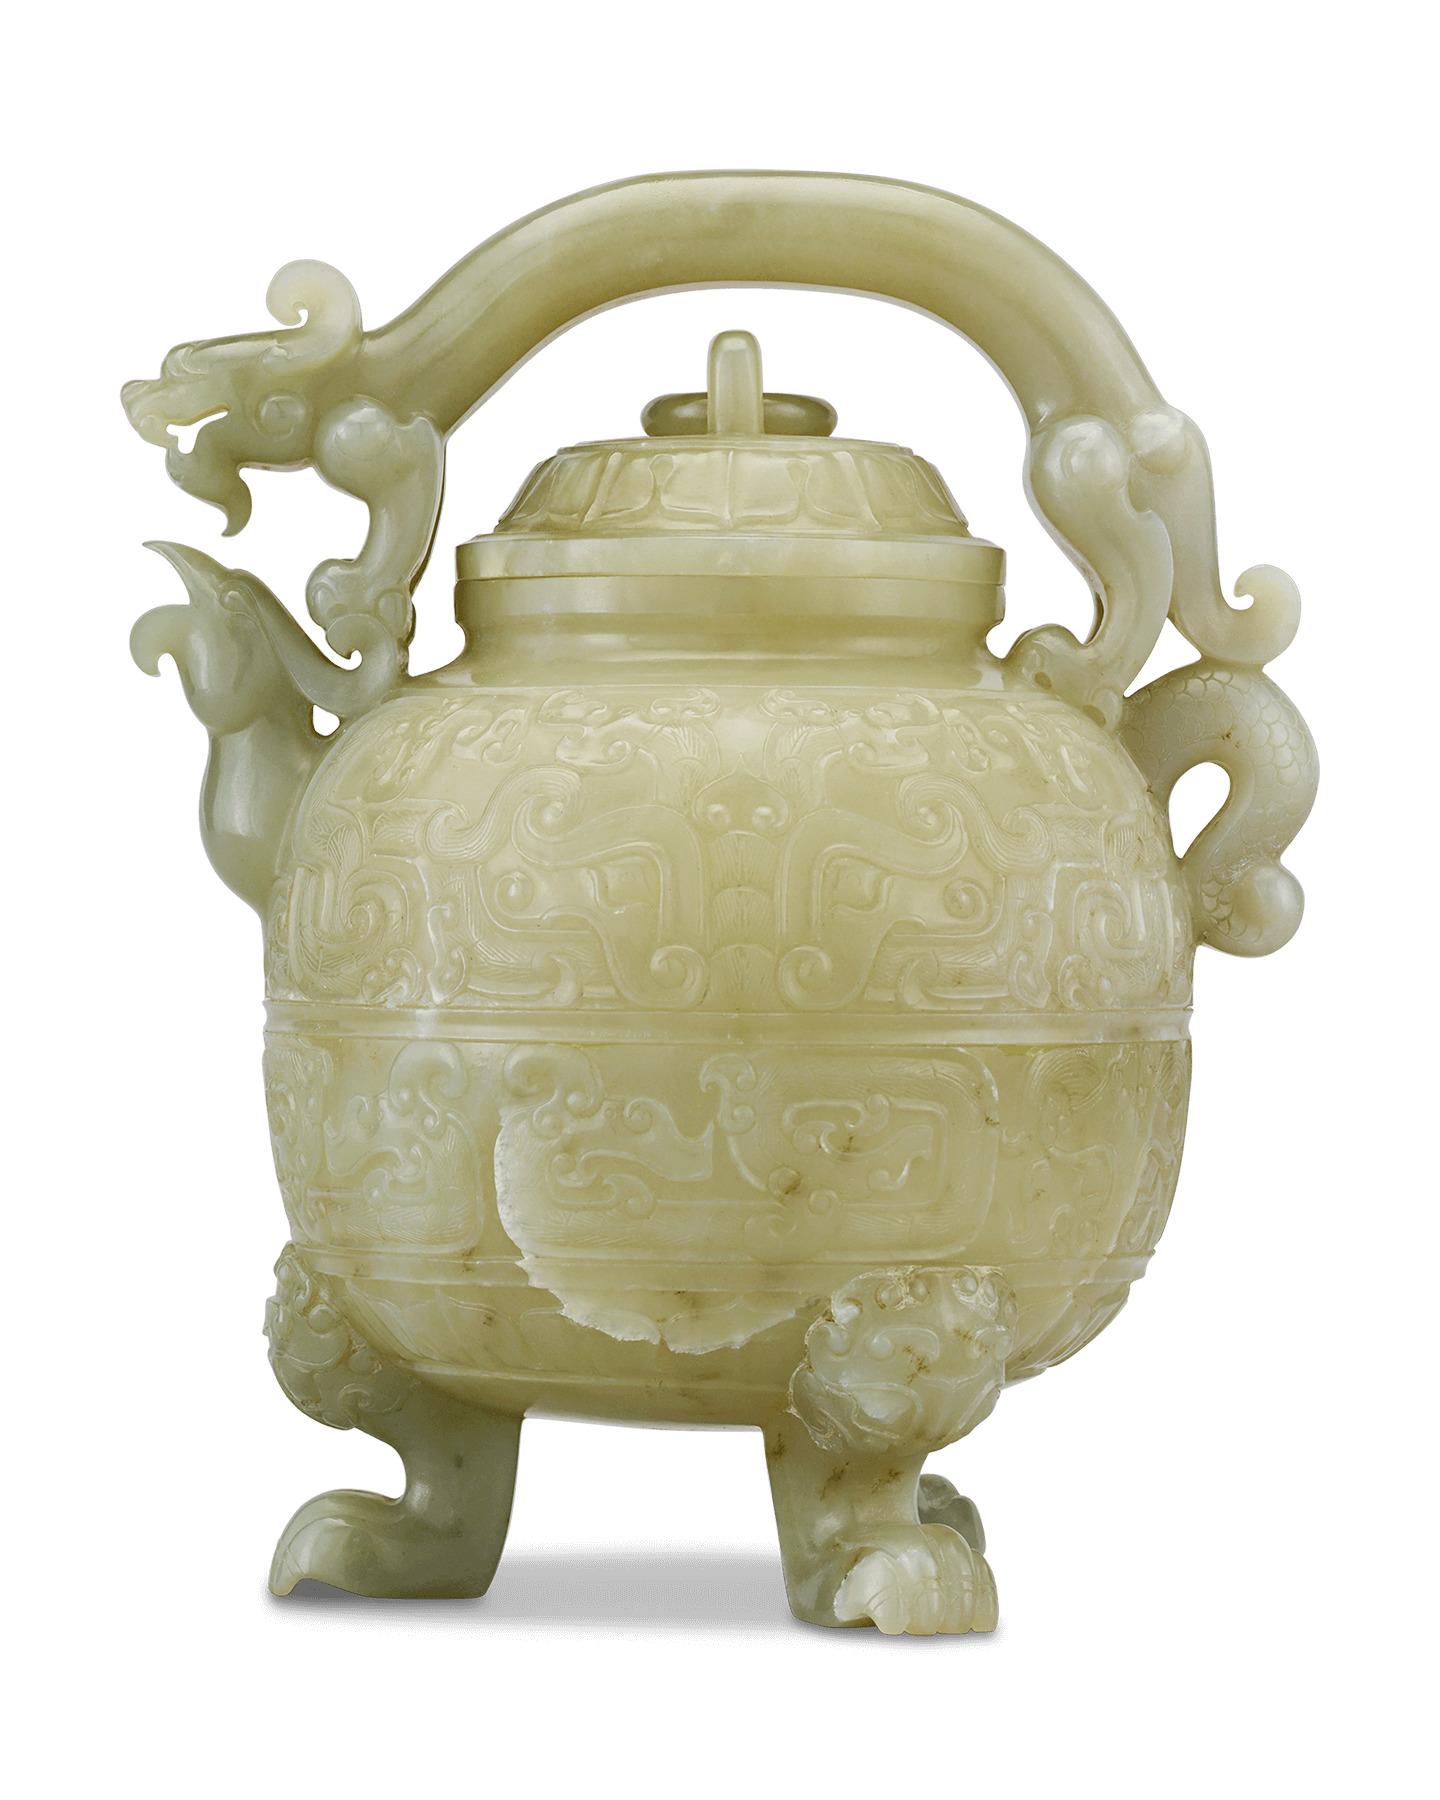 Outstanding in artistry and design, this absolutely gorgeous Chinese teapot is crafted entirely of green celadon jade, a favorite material in Asian decorative arts. A bevy of mythic motifs of Chinese iconography and folklore adorn this beautiful